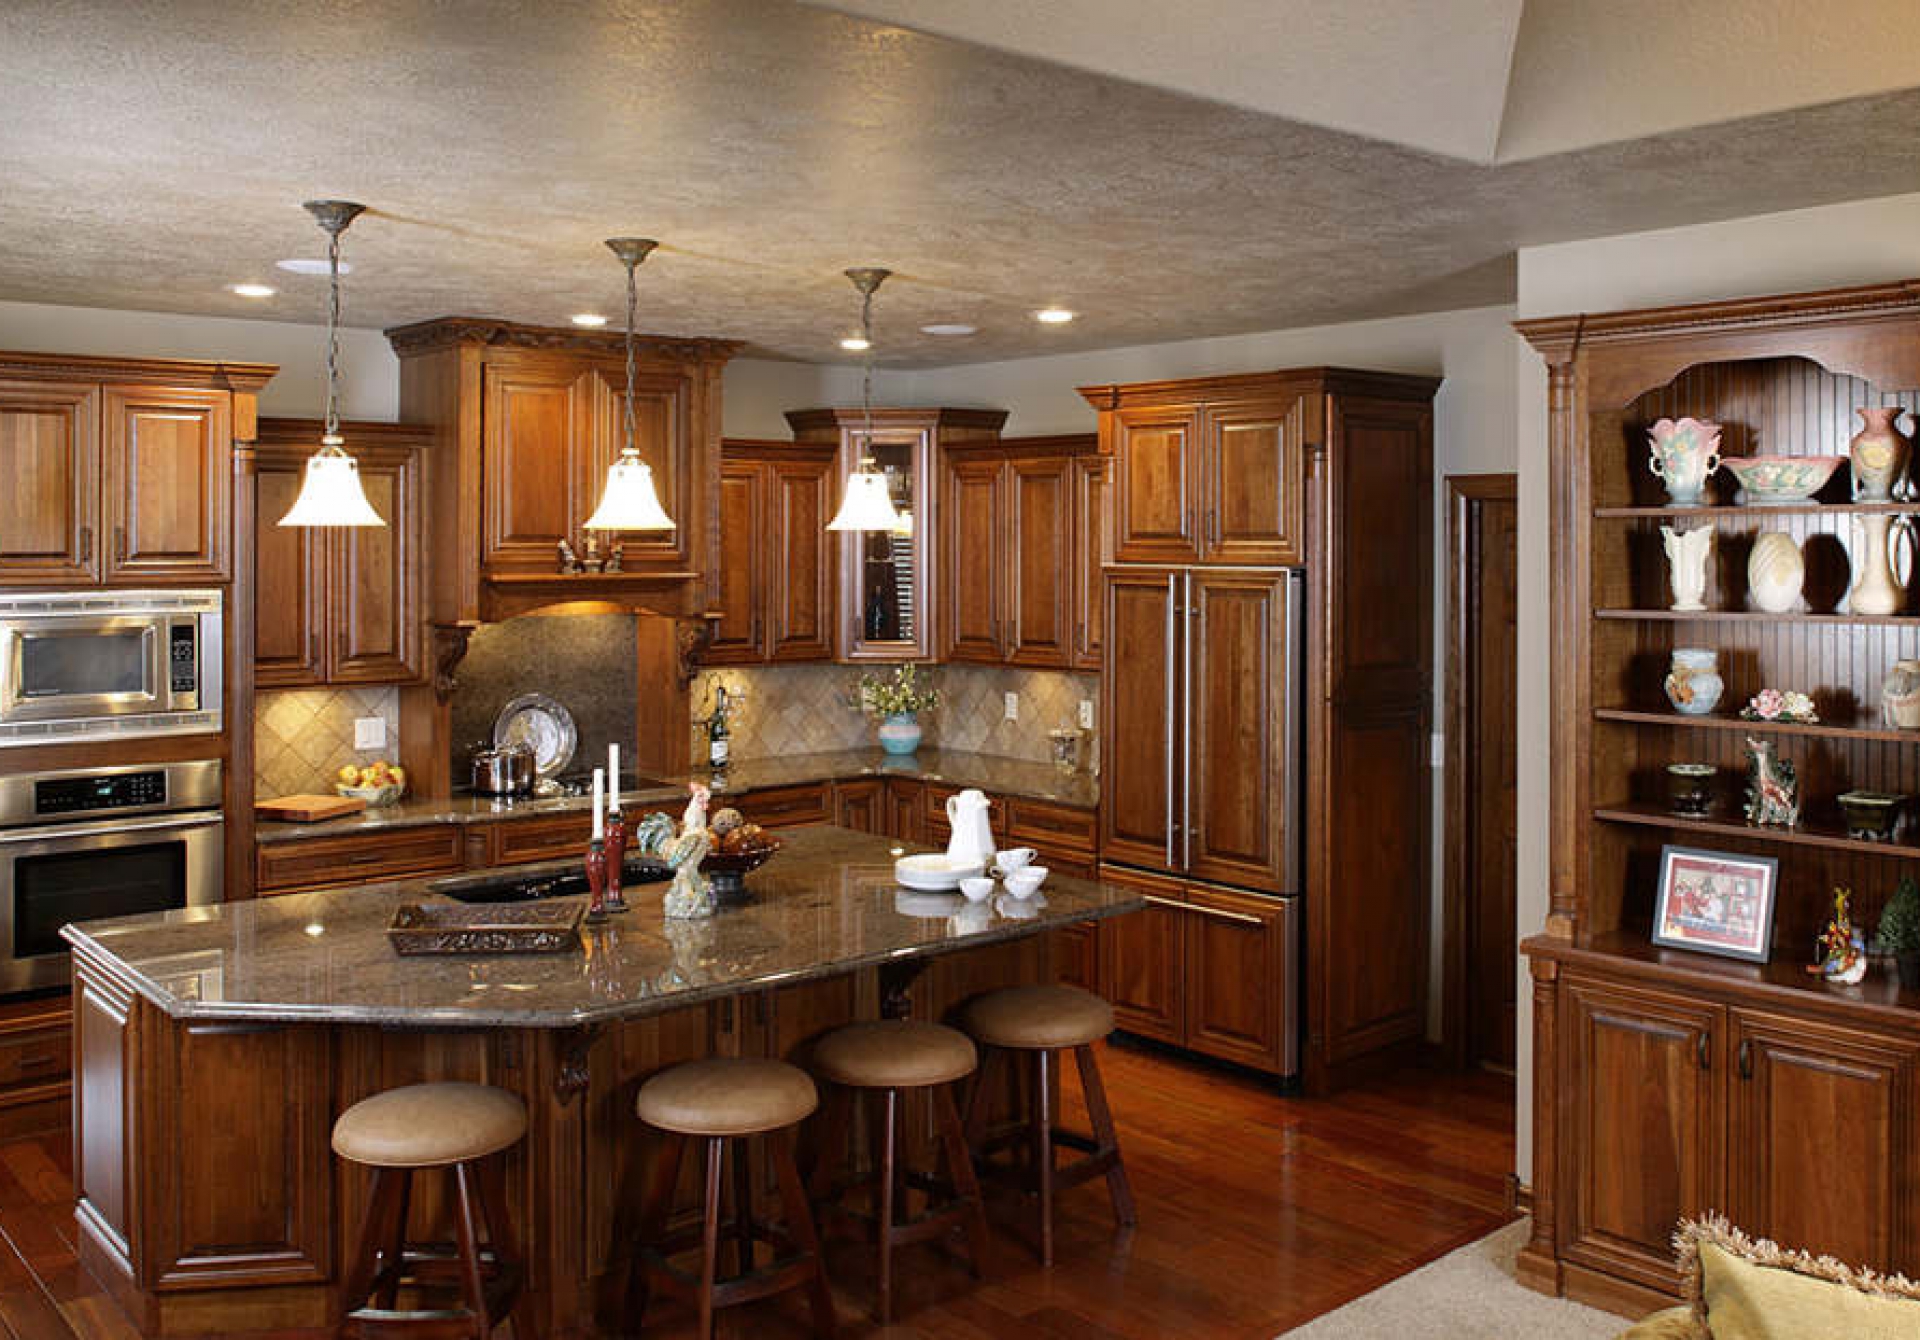 Cleaning and Maintenance of Counter-tops and Solid Wood Kitchen Cabinet Doors